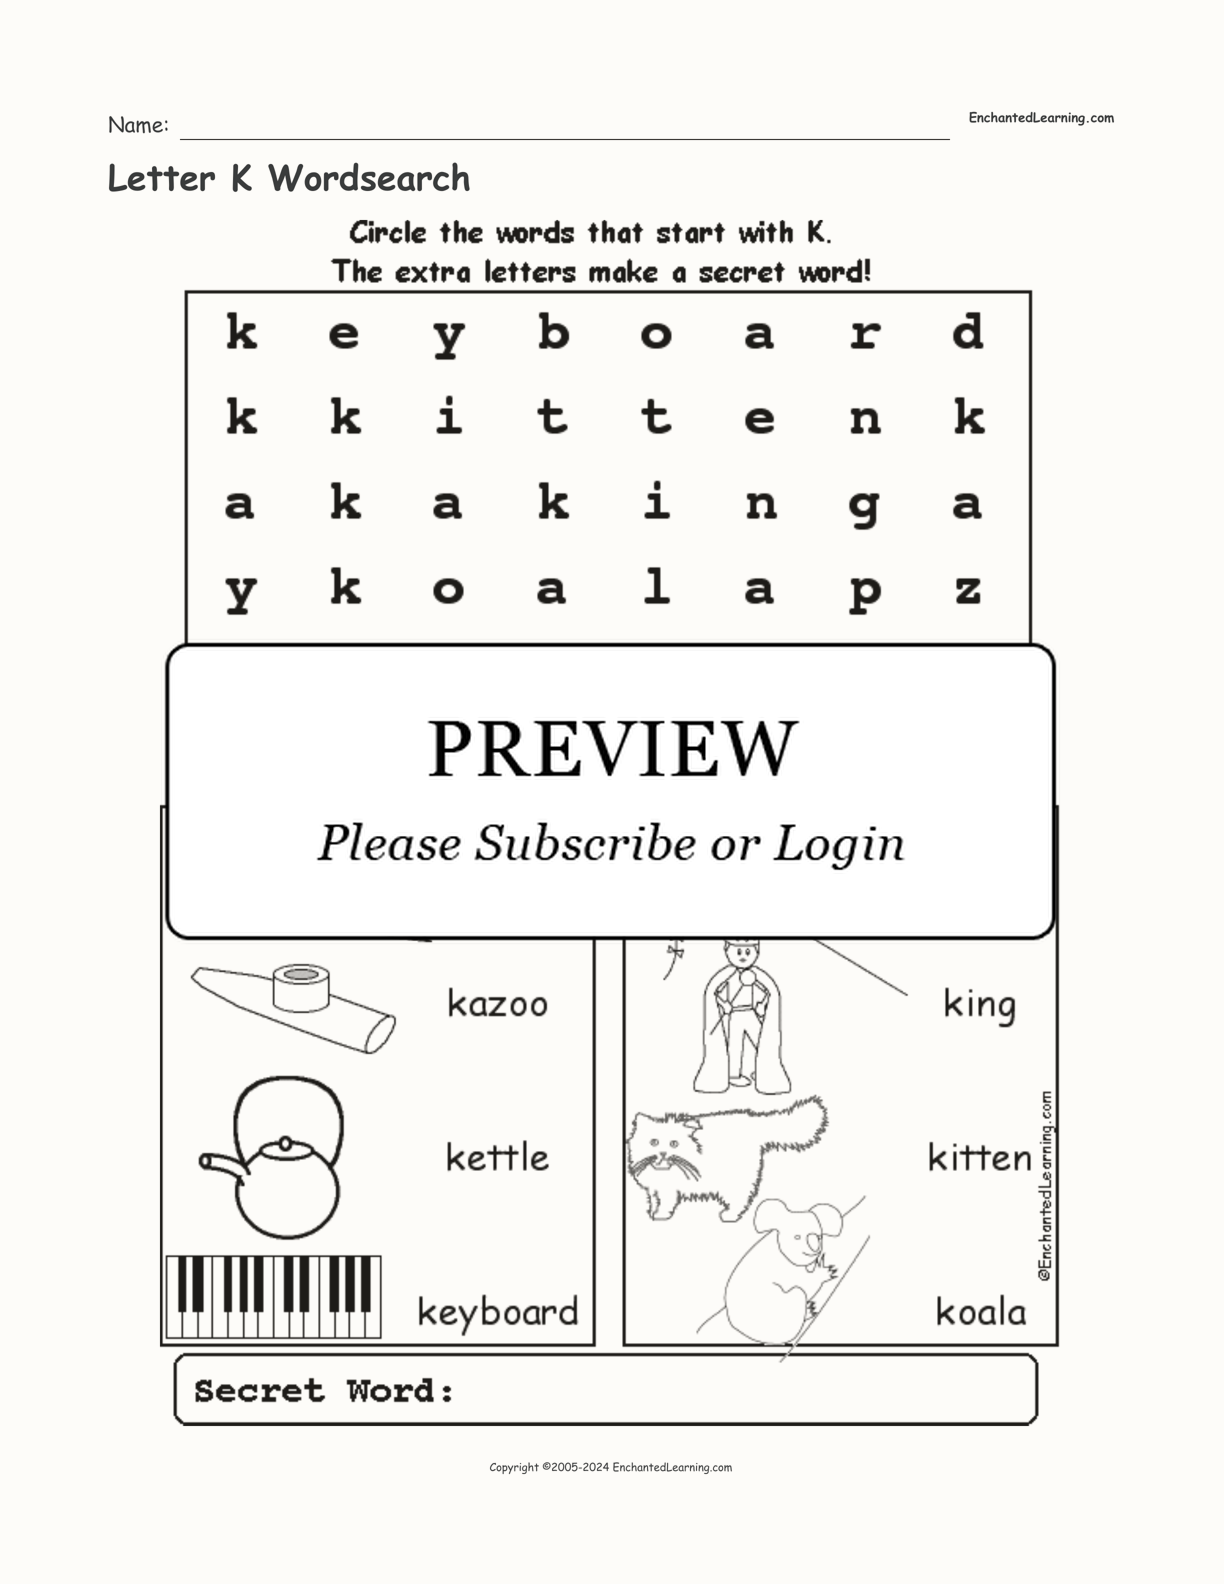 Letter K Wordsearch interactive worksheet page 1